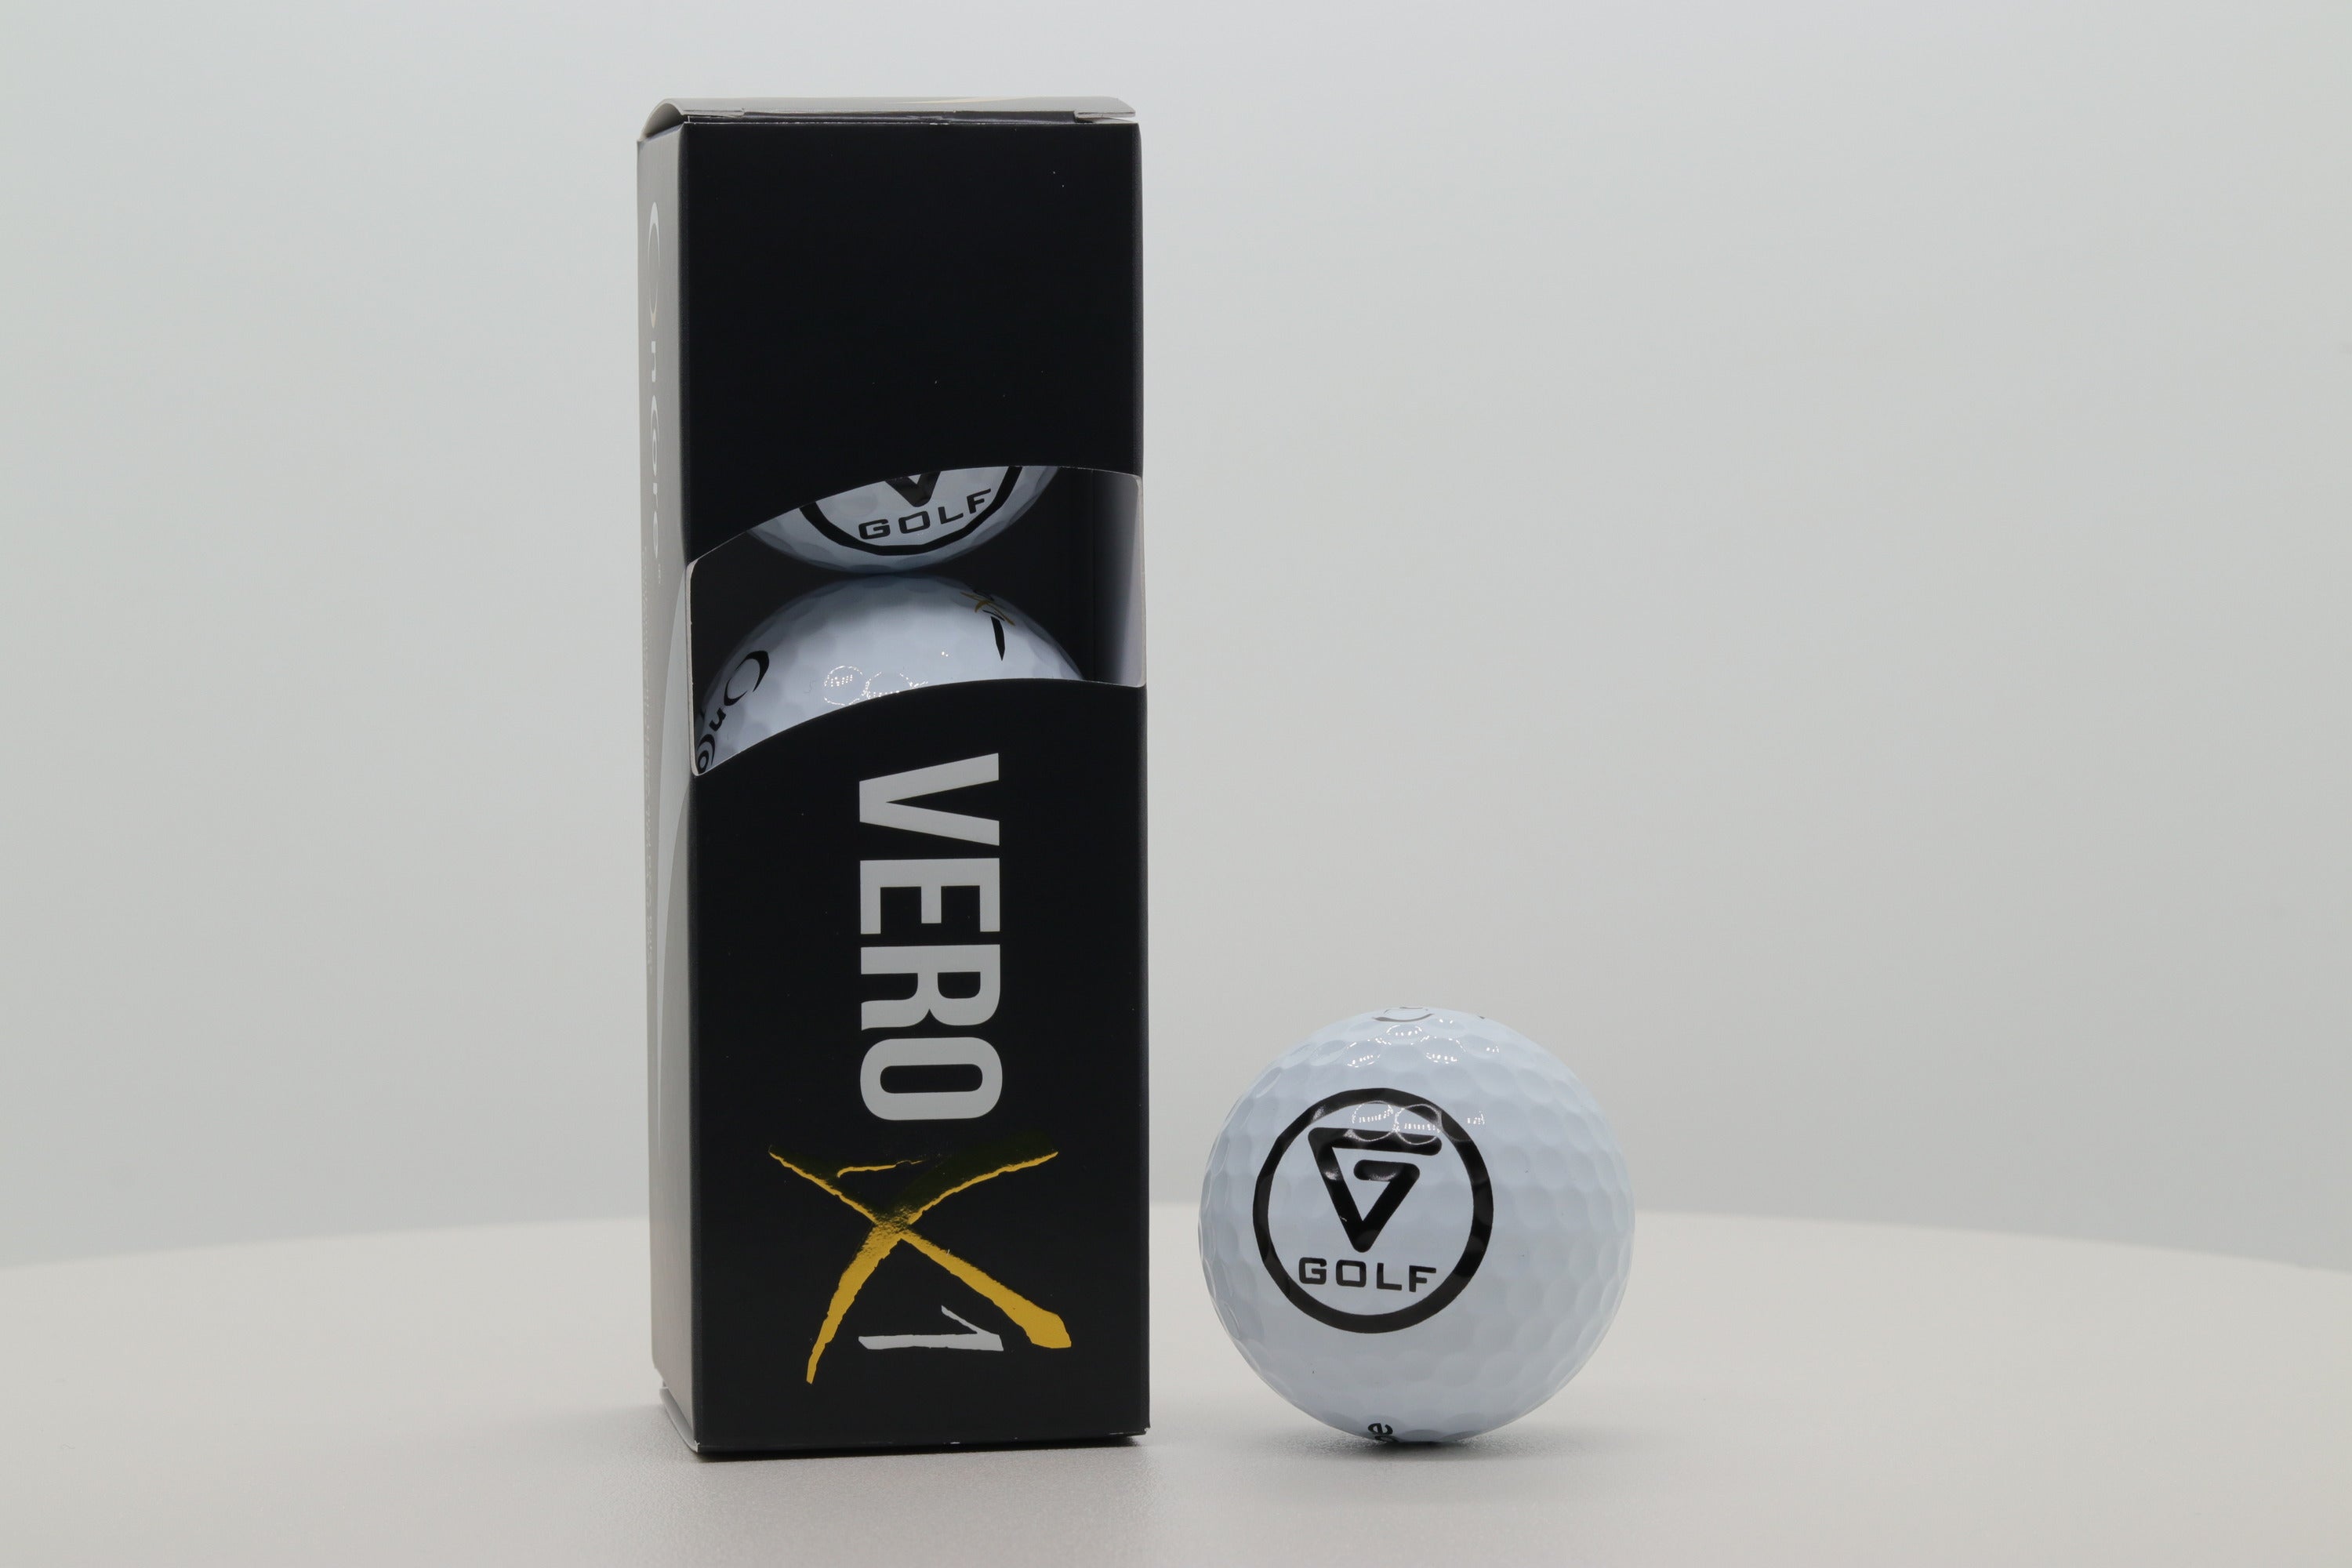 OnCore Vero 2 Golf Balls by Vertical Groove Golf (VGG)